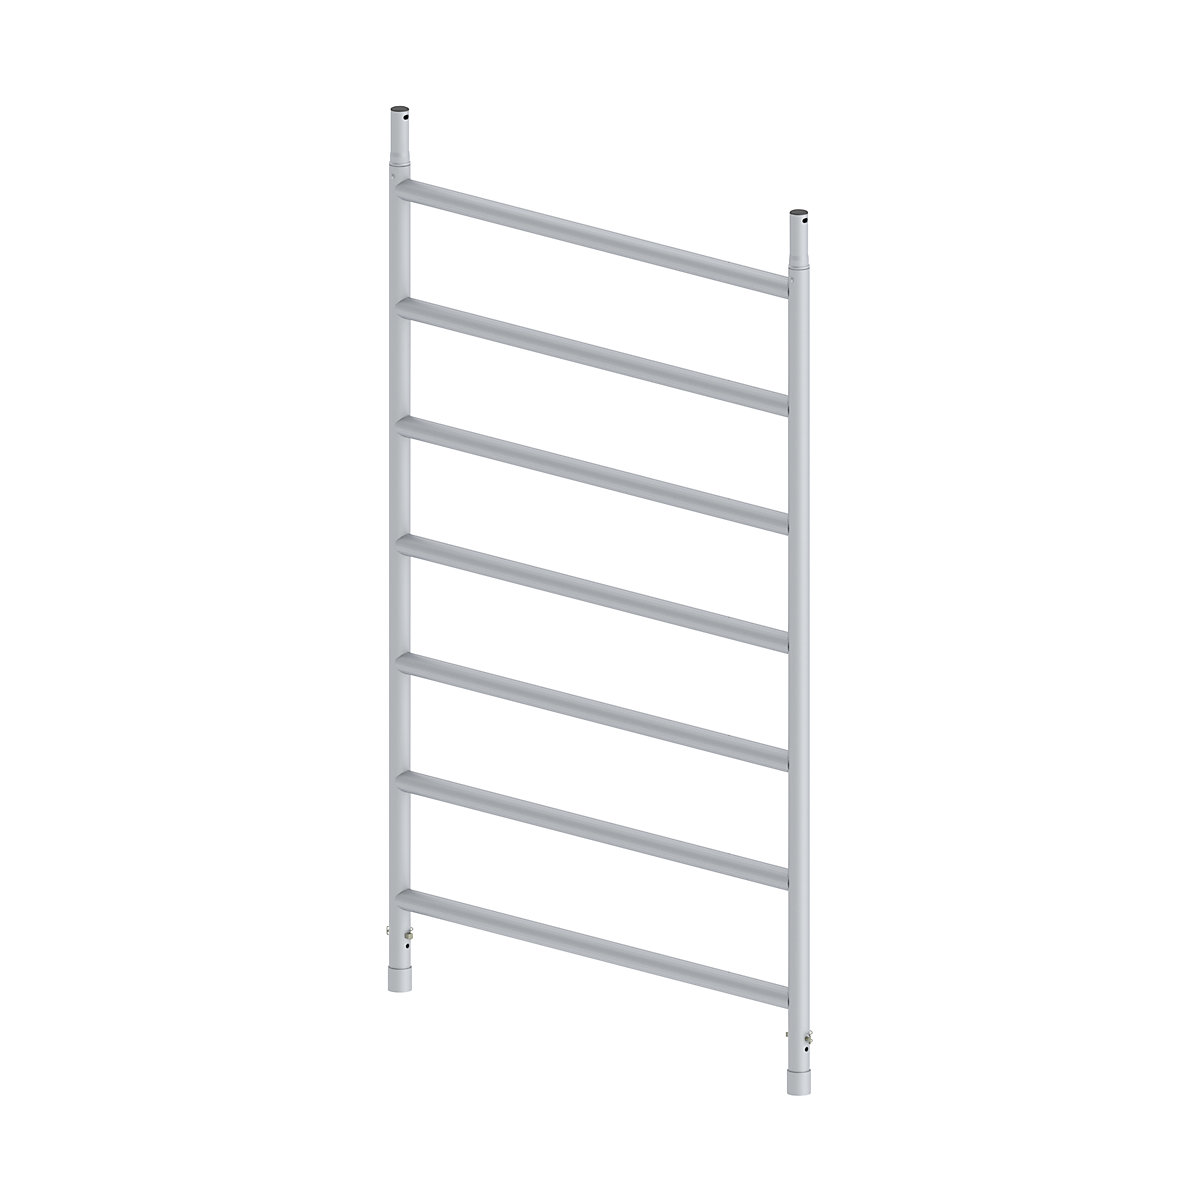 Frame – Altrex, for RS TOWER 4 series mobile access towers, for width 1.35 m, 7 cross struts-2